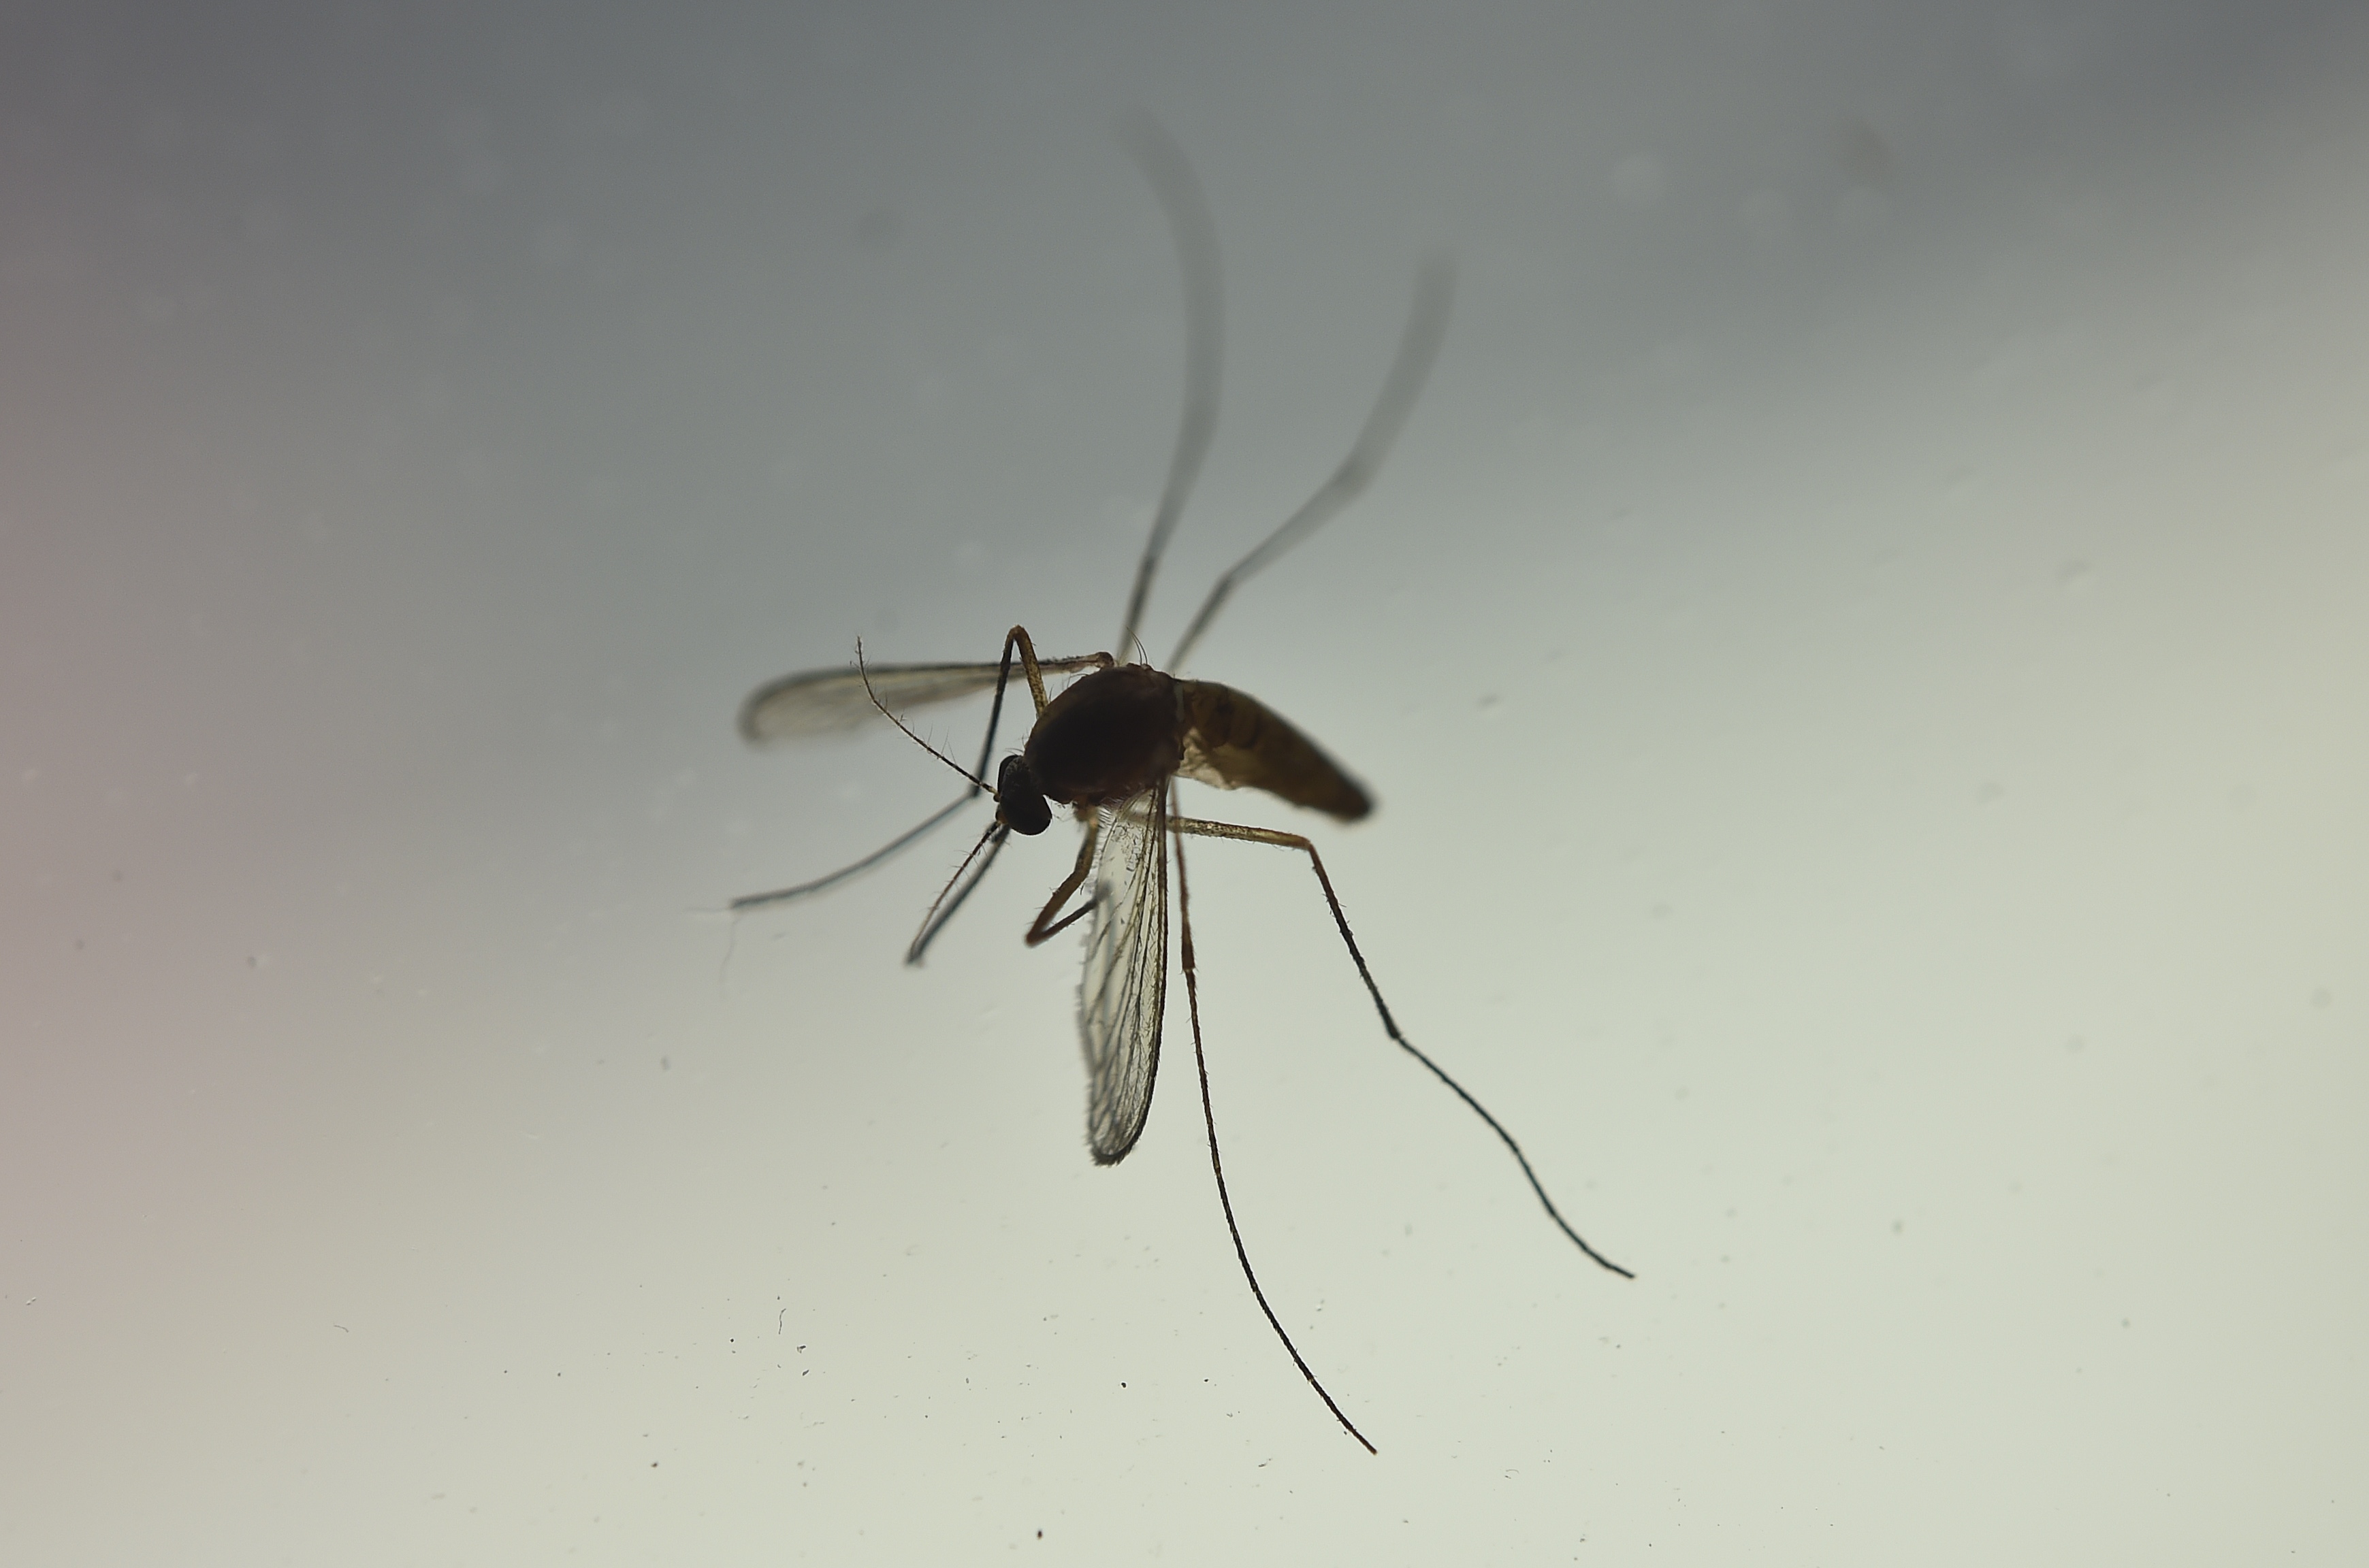 View of a mosquito in Mexico City on May 7, 2016.  Researchers have recently discovered the Zika virus in a second mosquito species known as the "Asian Tiger" mosquito, (formally named Aedes albopictus). The species stretches much further north into the United States than the previously known Zika carrying Aedes aegypti species, as stated in the April 21 "Zika - Epidemiological Update" report issued by Pan American Health Organization and the World Health Organization..  / AFP PHOTO / YURI CORTEZ